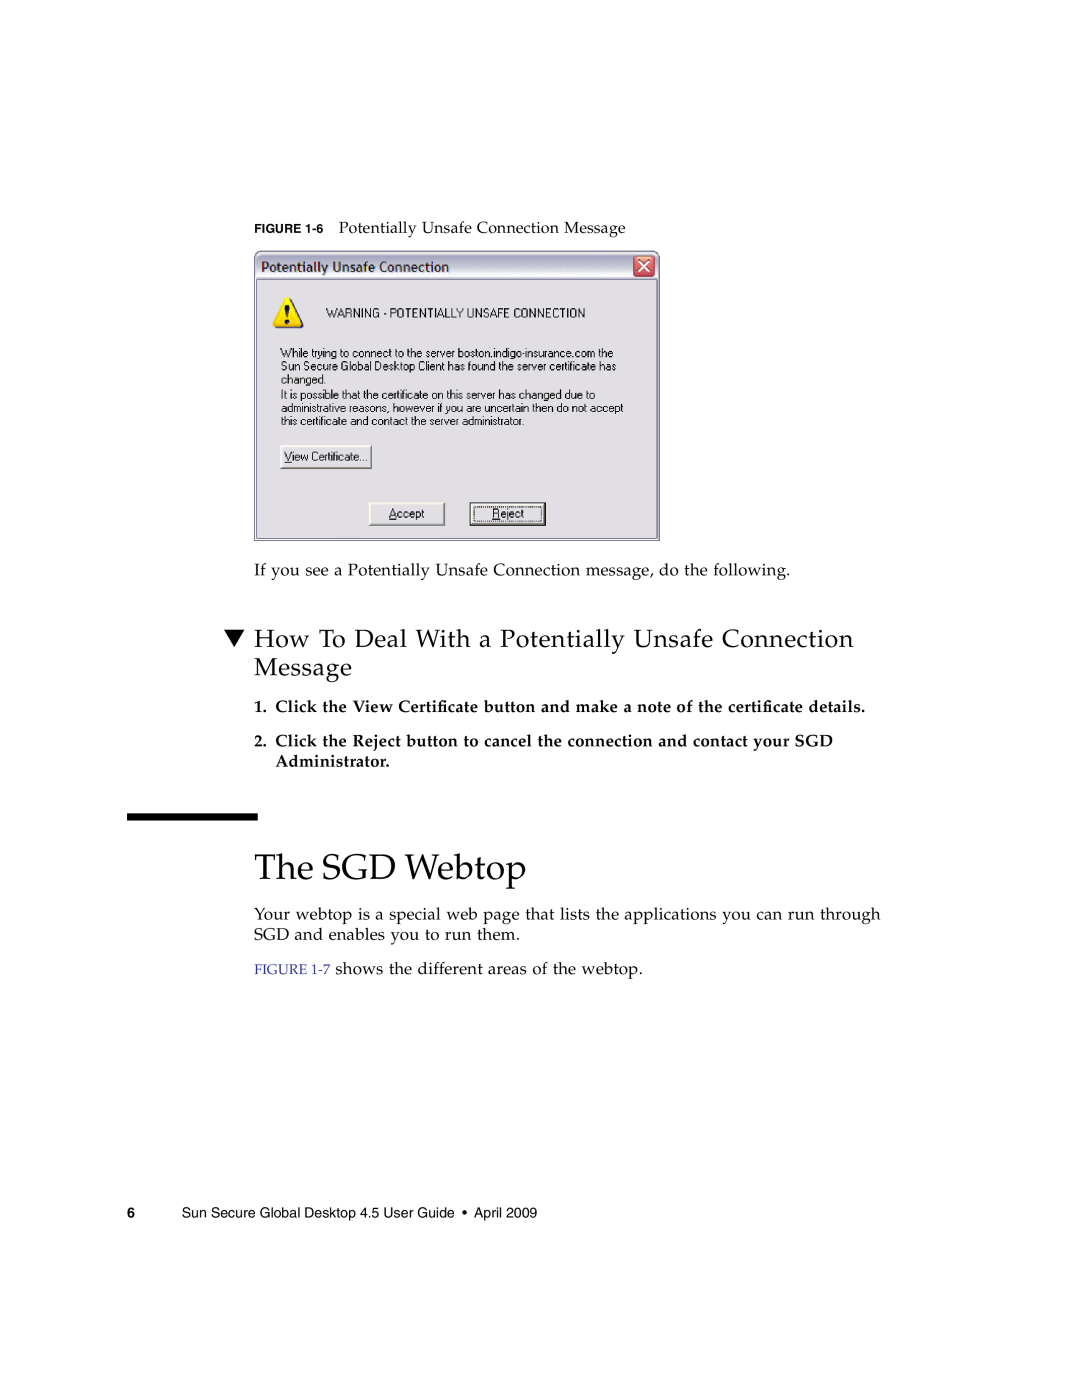 Sun Microsystems 4.5 manual The SGD Webtop, How To Deal With a Potentially Unsafe Connection Message 